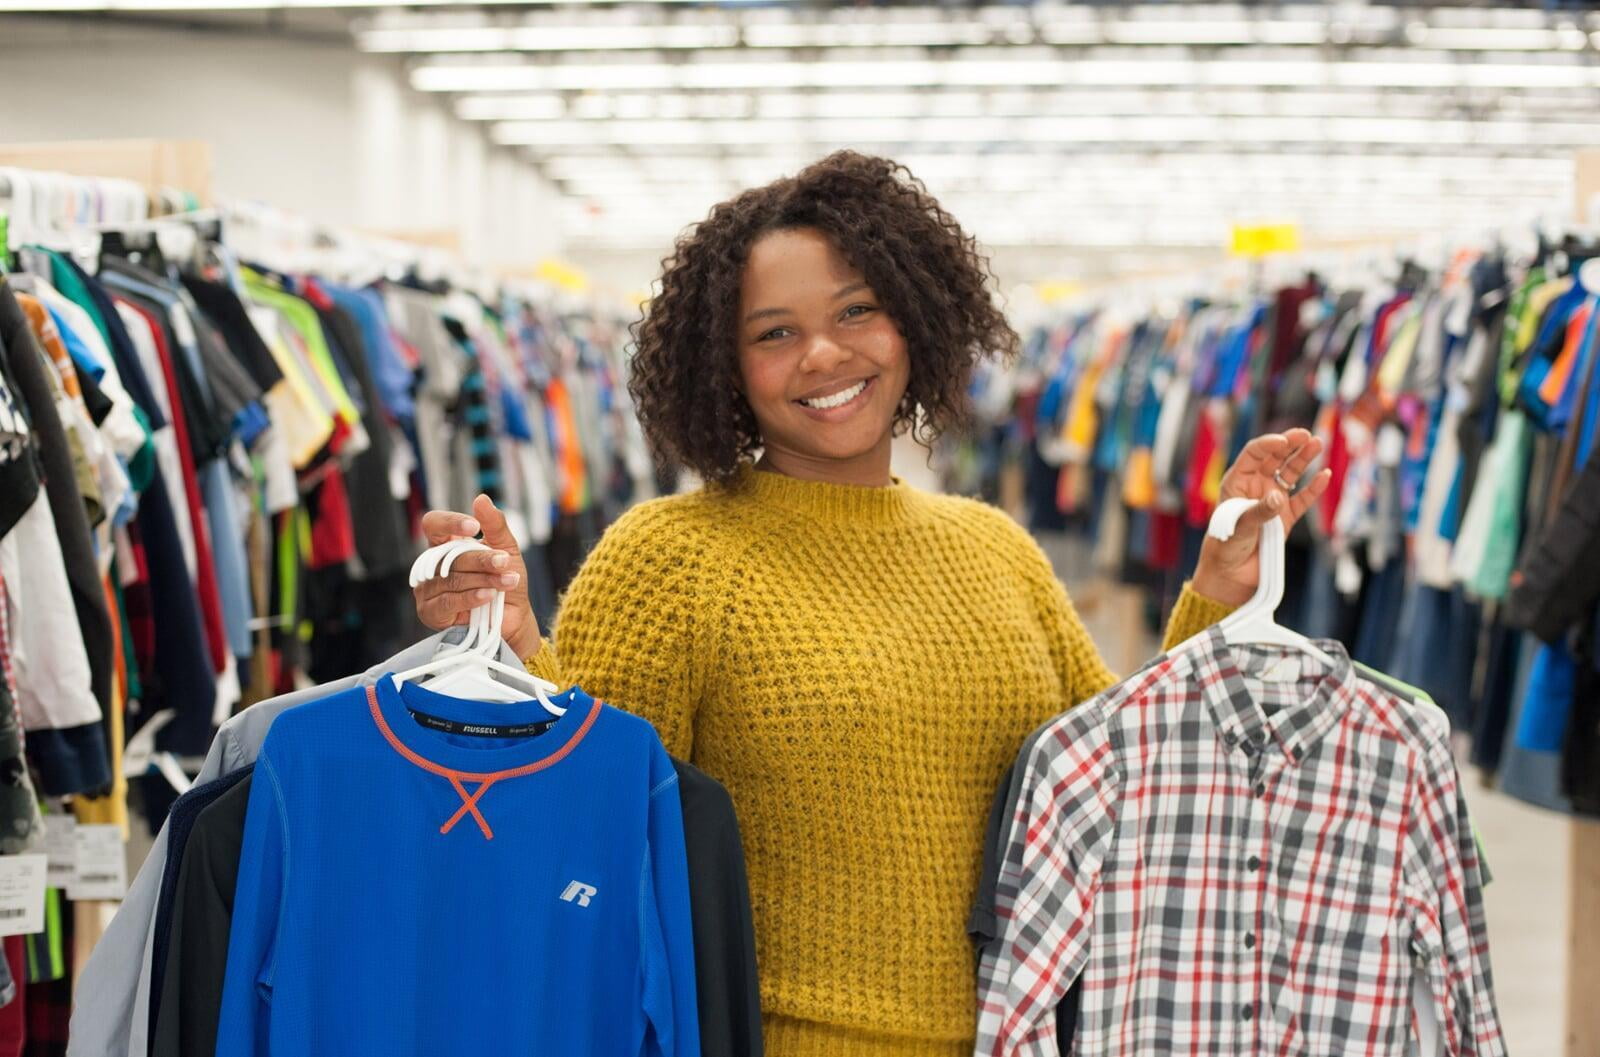 A women in a yellow sweater holds clothes on hangers in both hands. She is smiling.